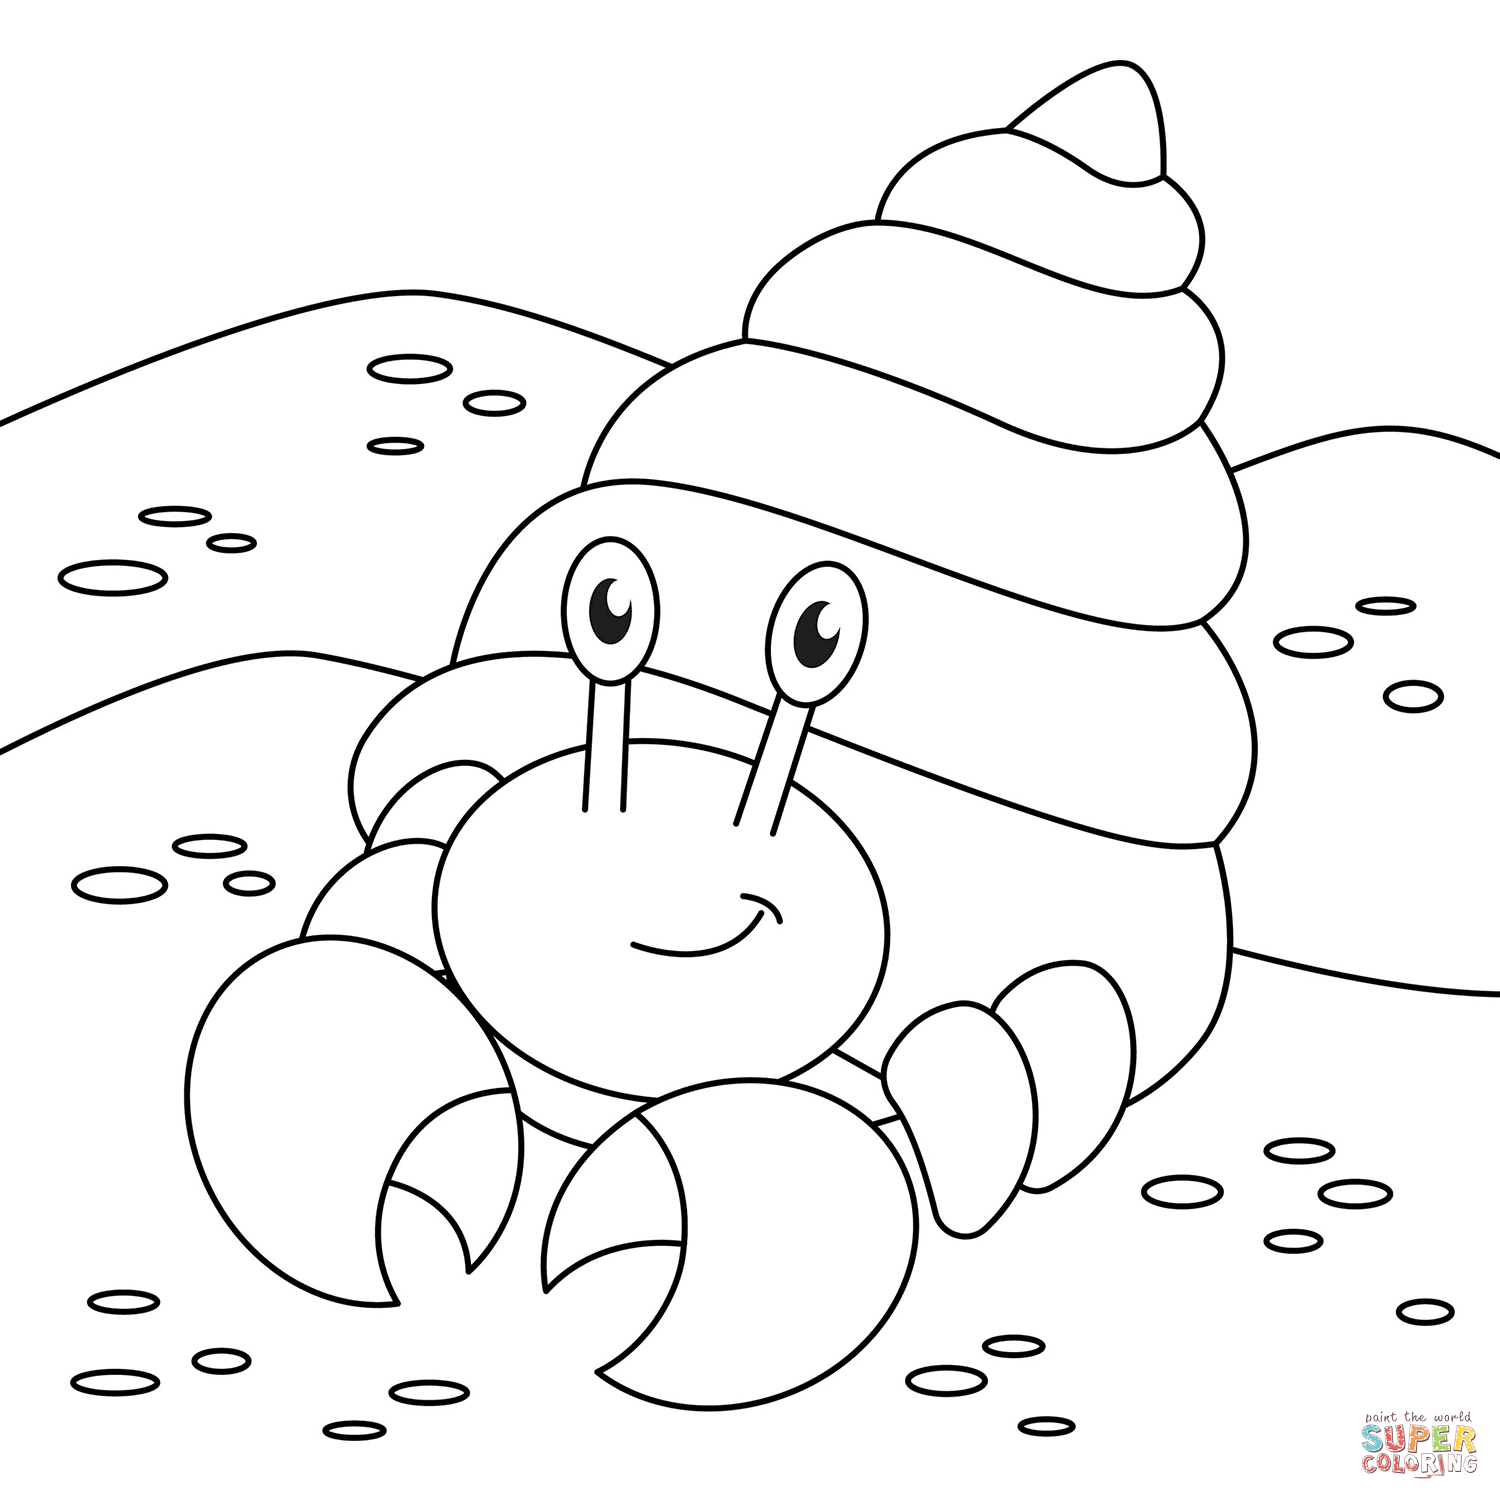 Cute hermit crab coloring page free printable coloring pages